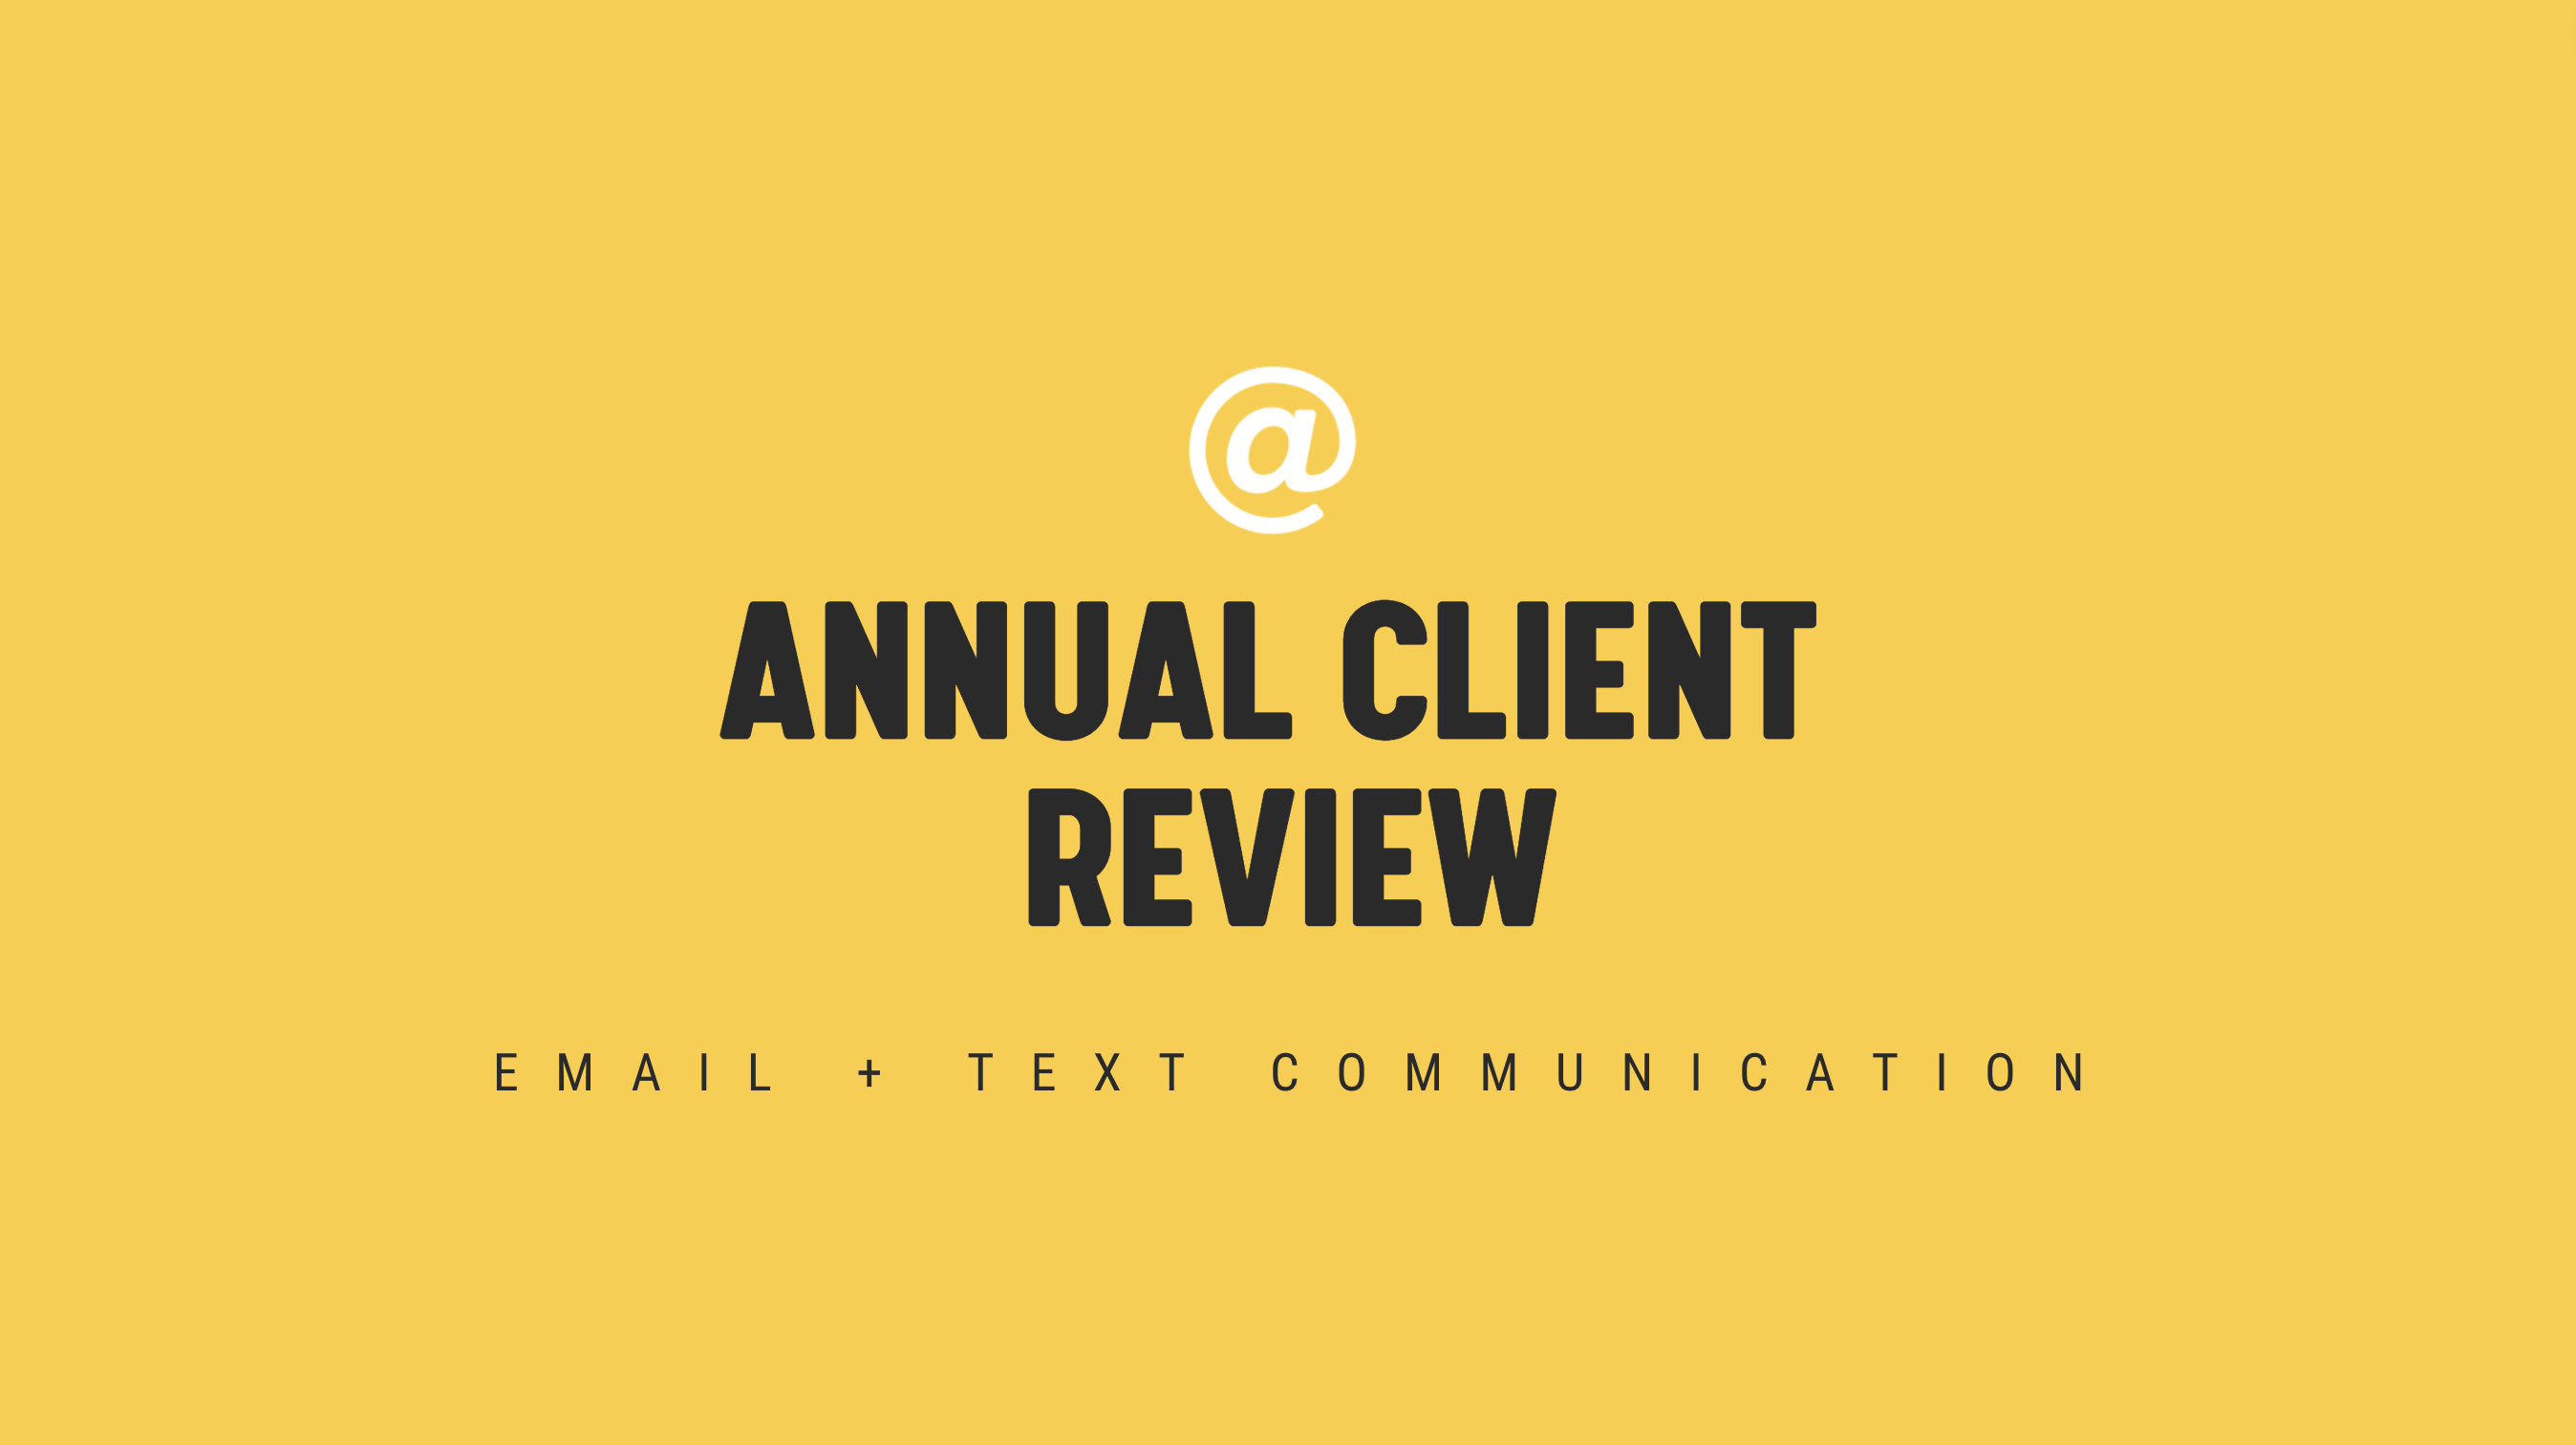 [NEW] Annual Client Review - Single Email